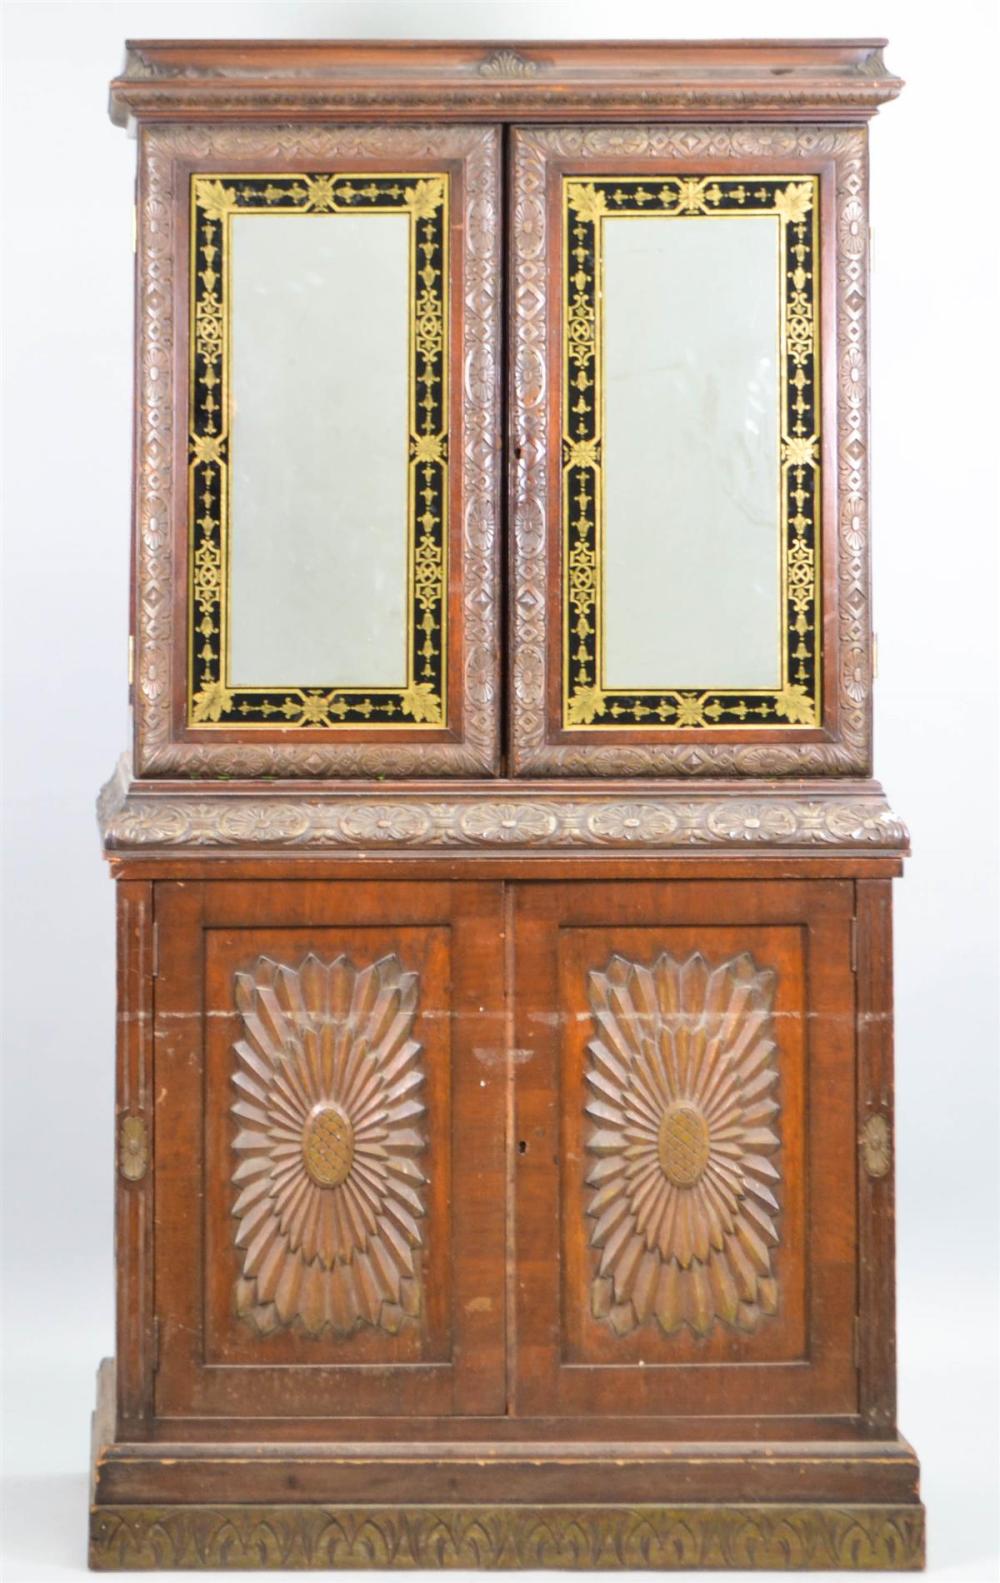 ANGLO-INDIAN STYLE PARCEL-GILT